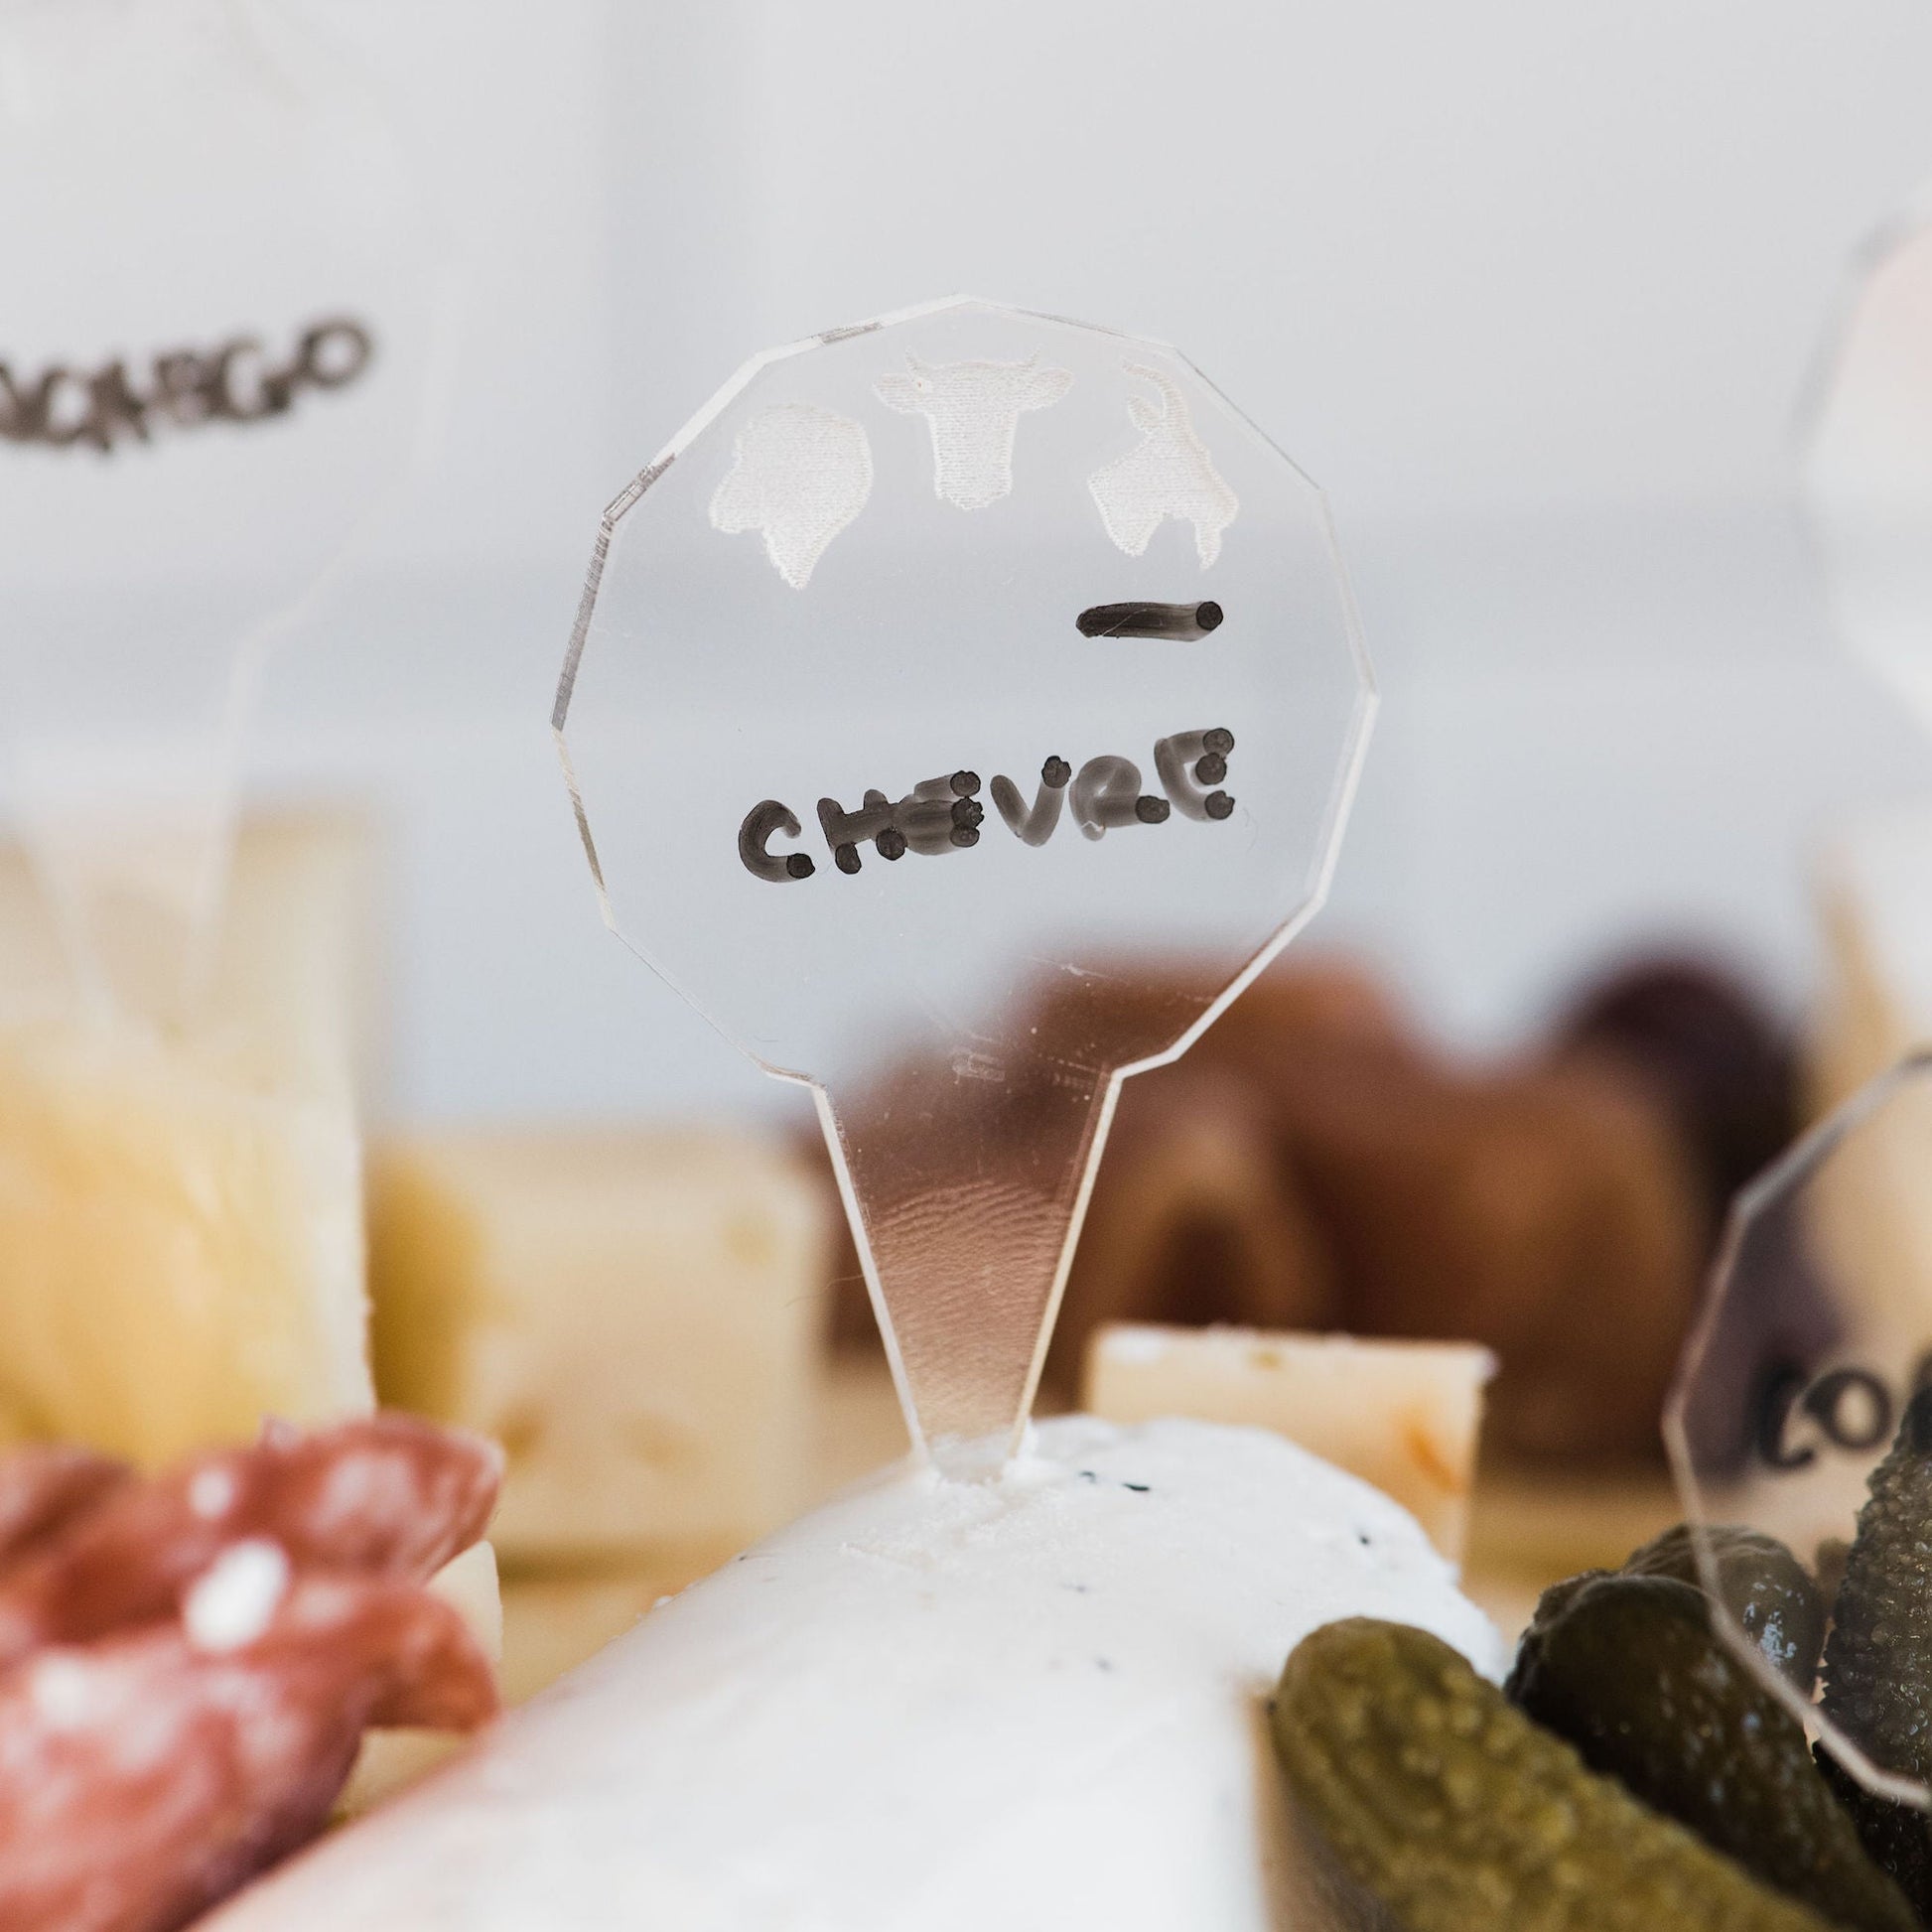 Dry-Erase Cheese labels - laser cut clear acrylic with animal heads - by LeeMo Designs in Bend, Oregon